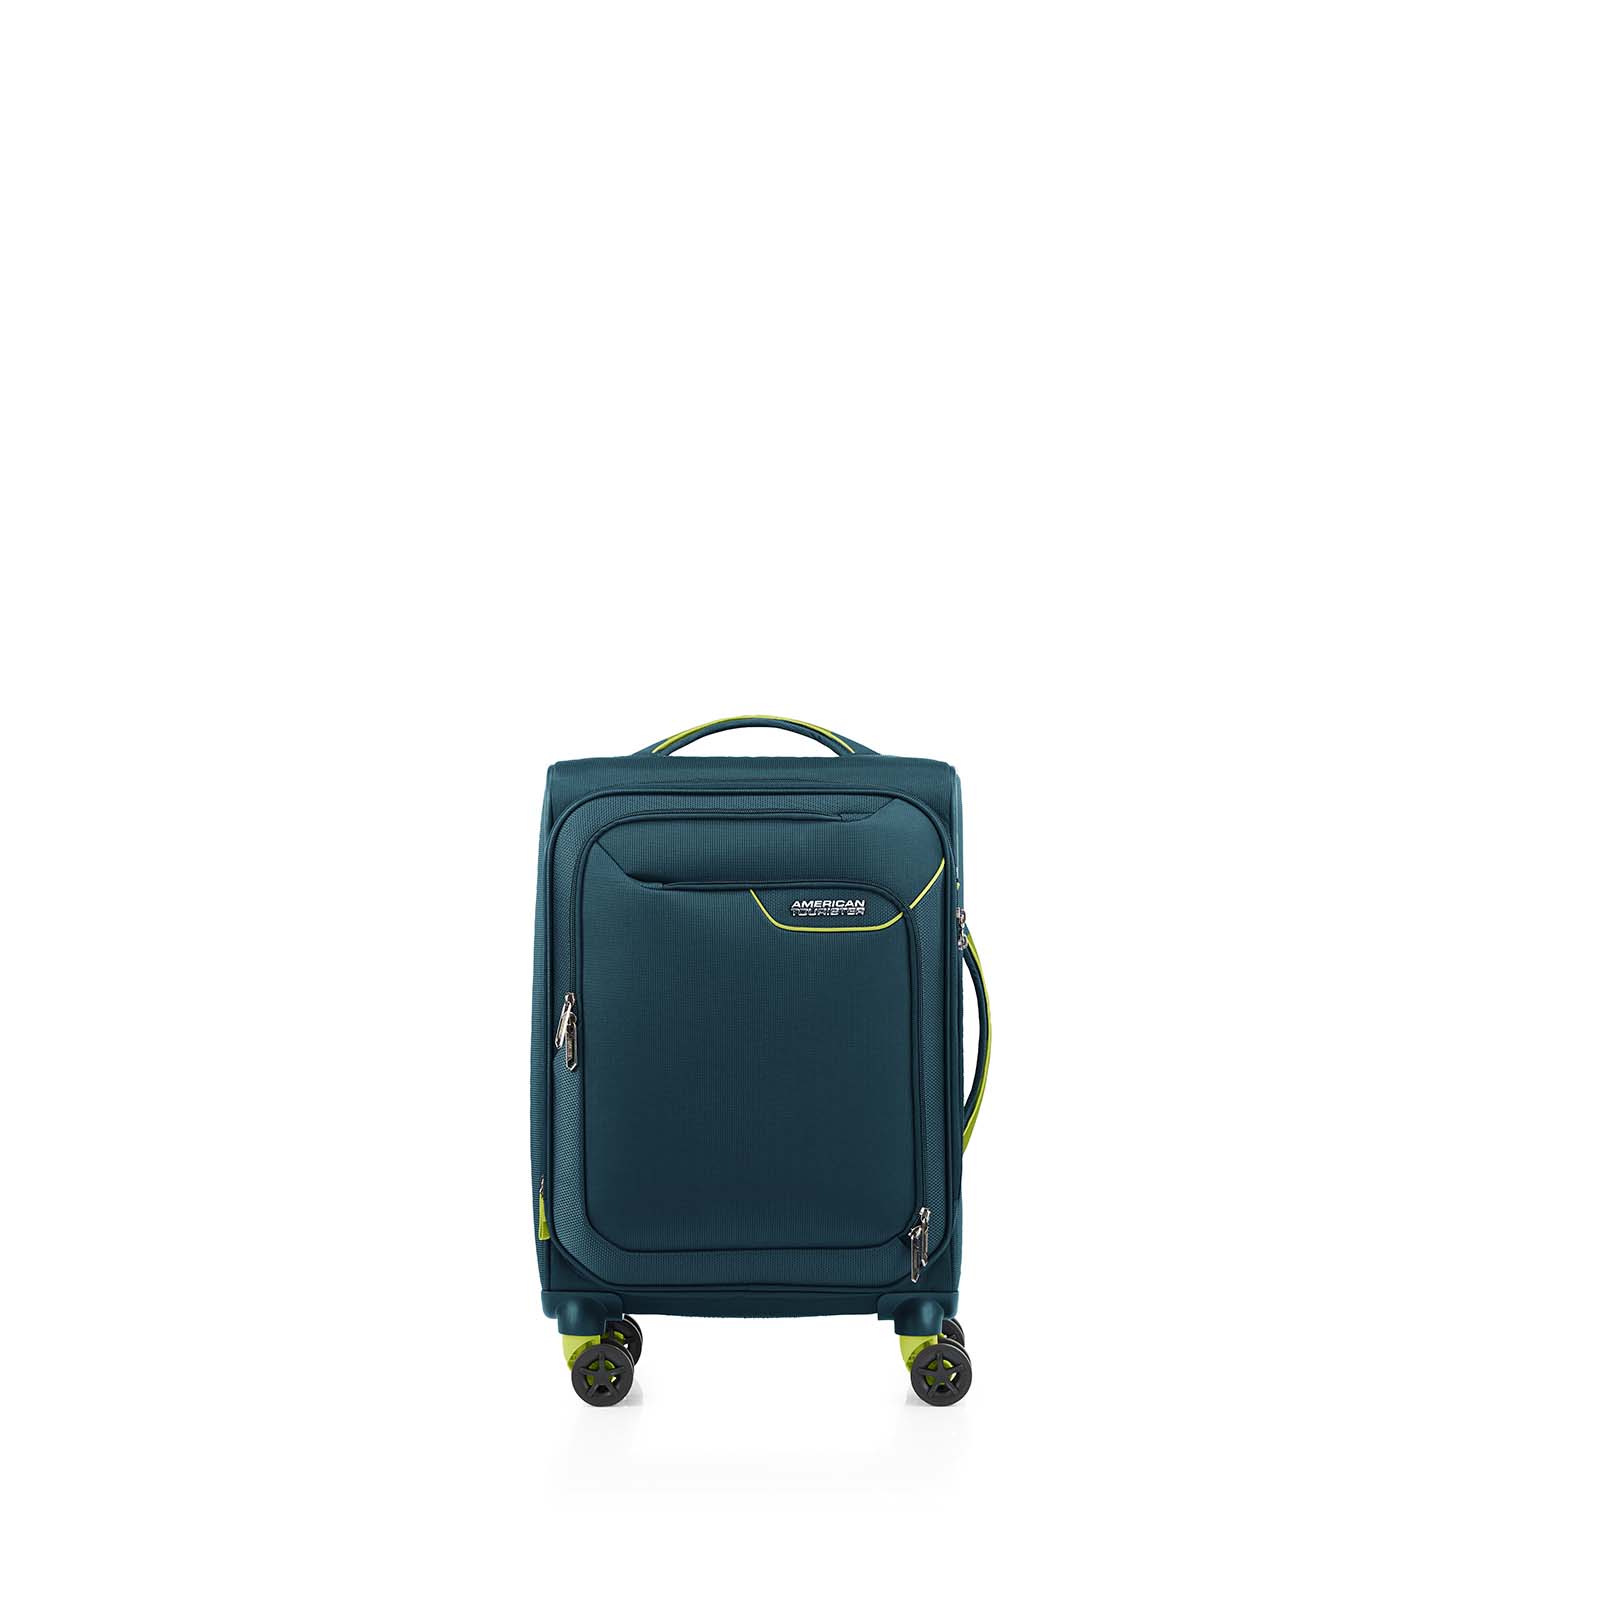 American-Tourister-Applite-4-Eco-55cm-Carry-On-Suitcase-Varsity-Green-Front